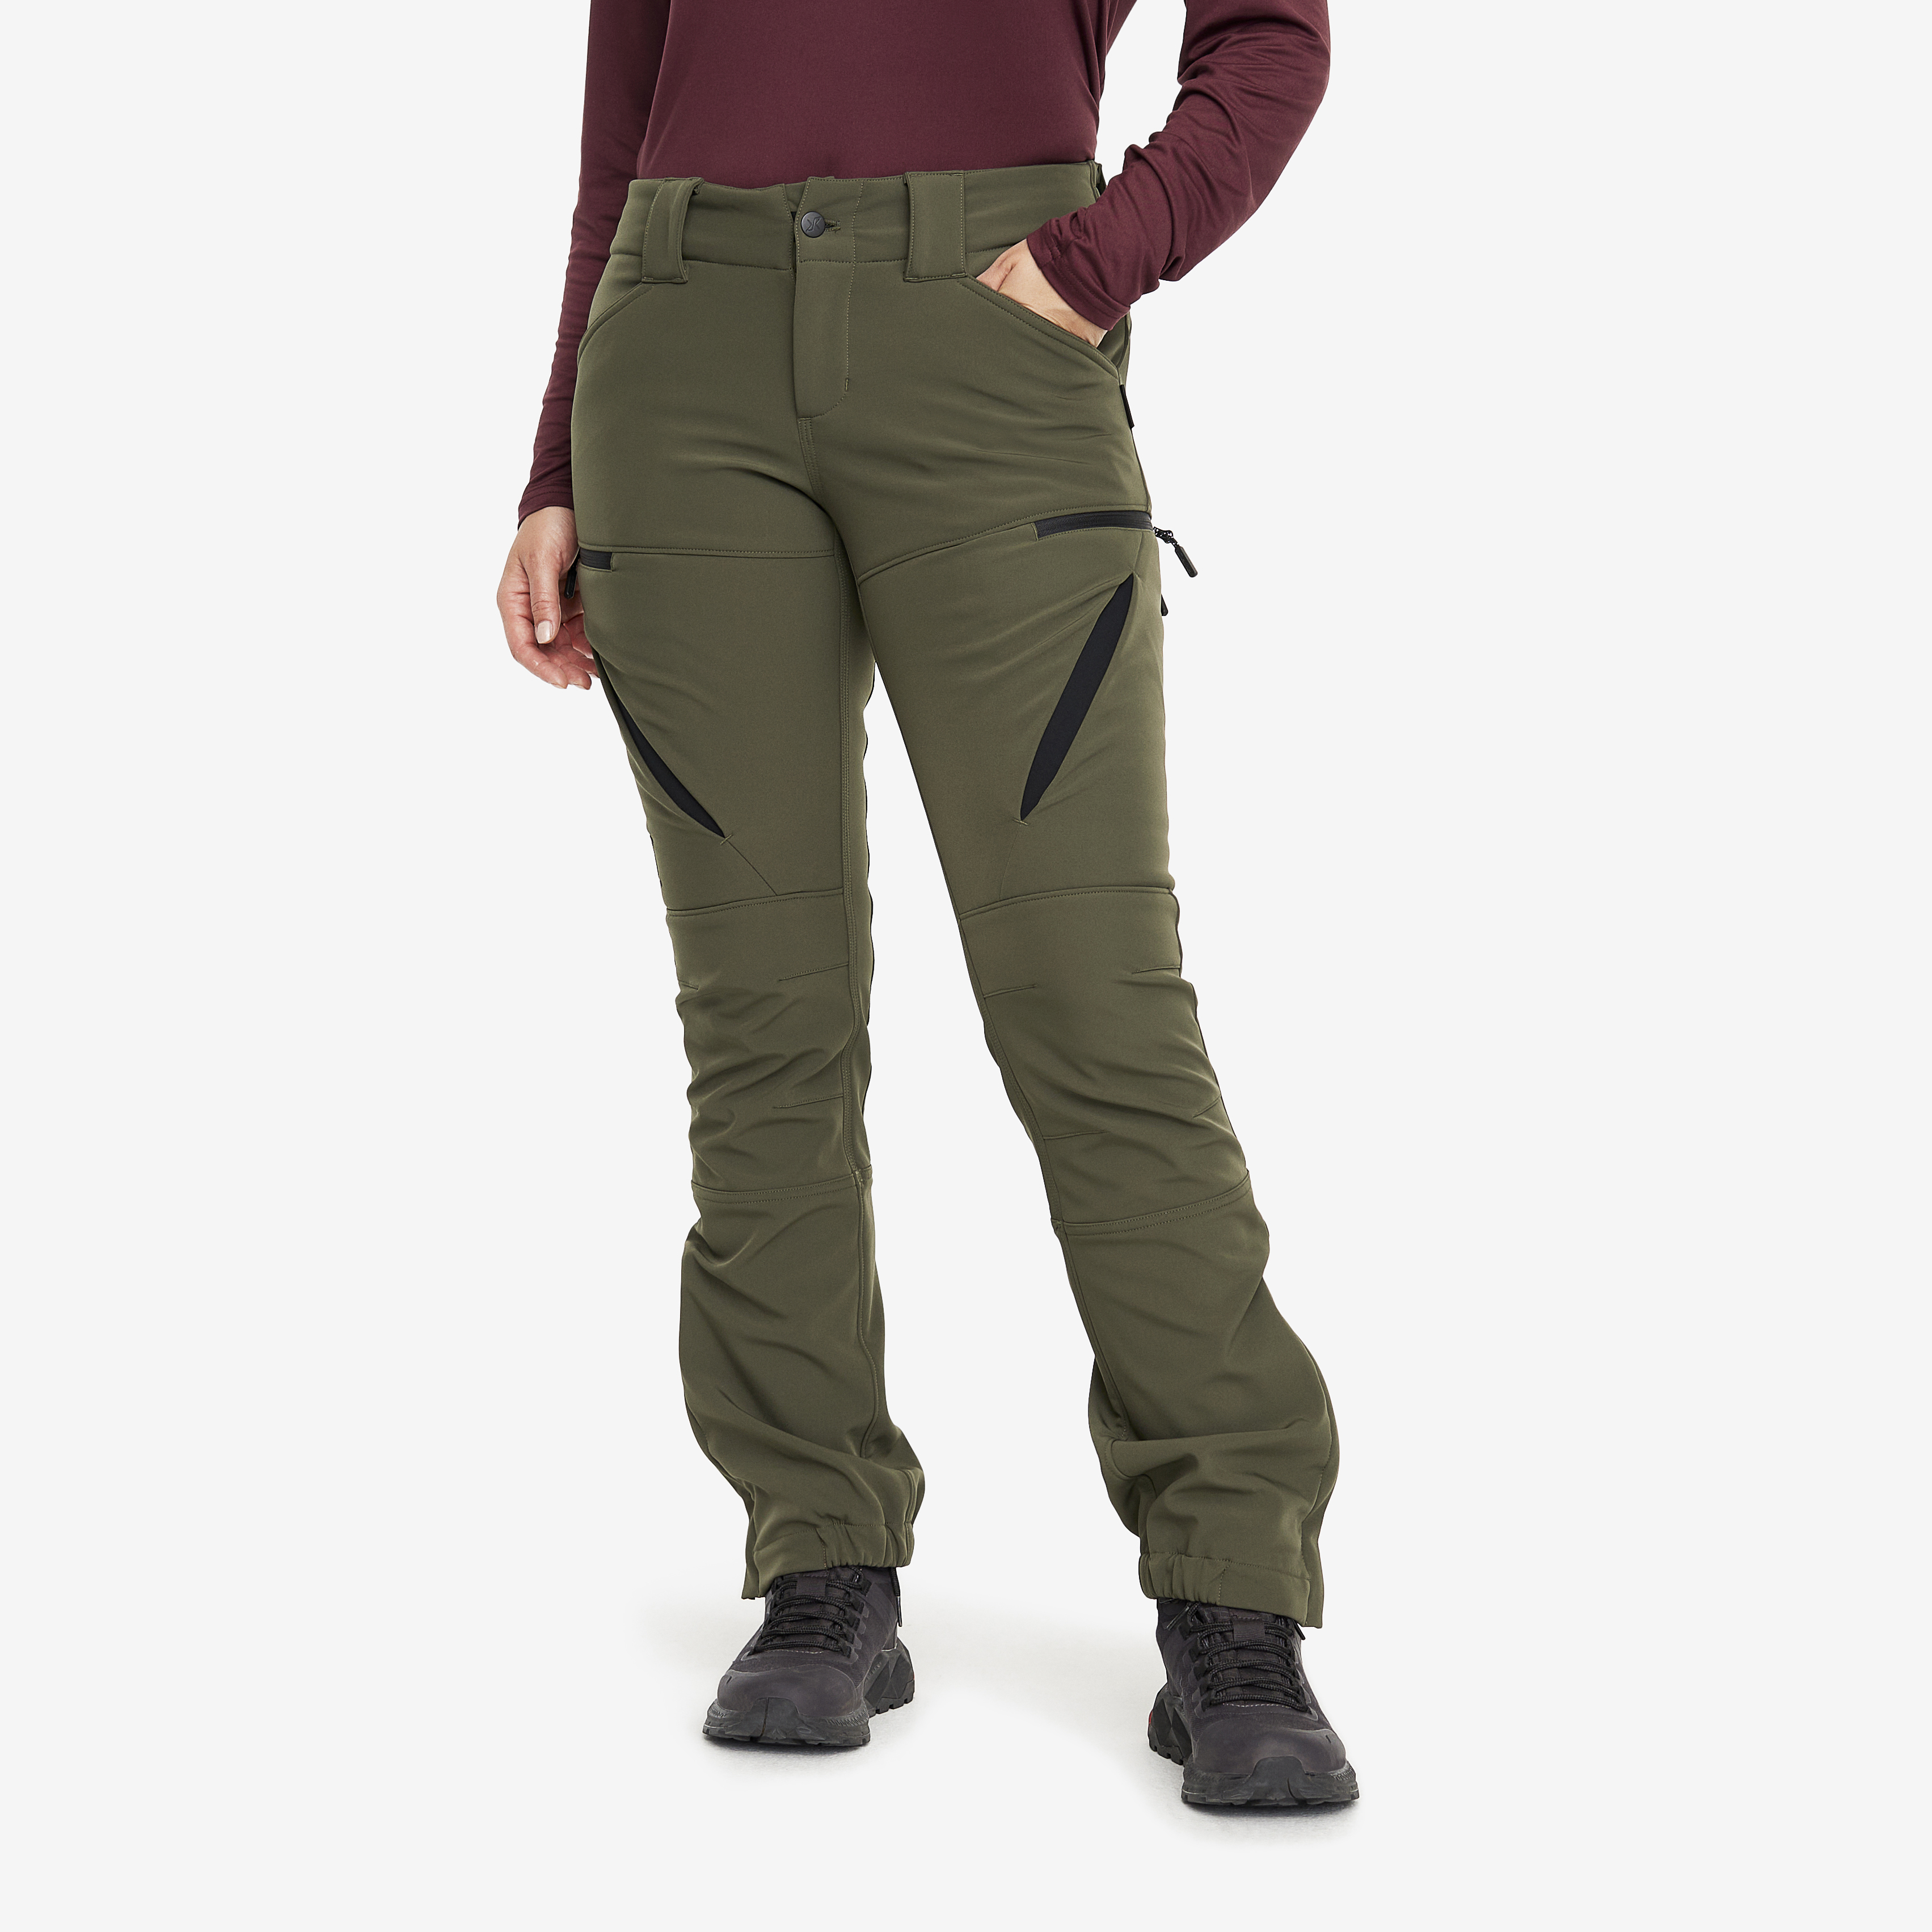 Hiball Pants Forest Night Mujeres